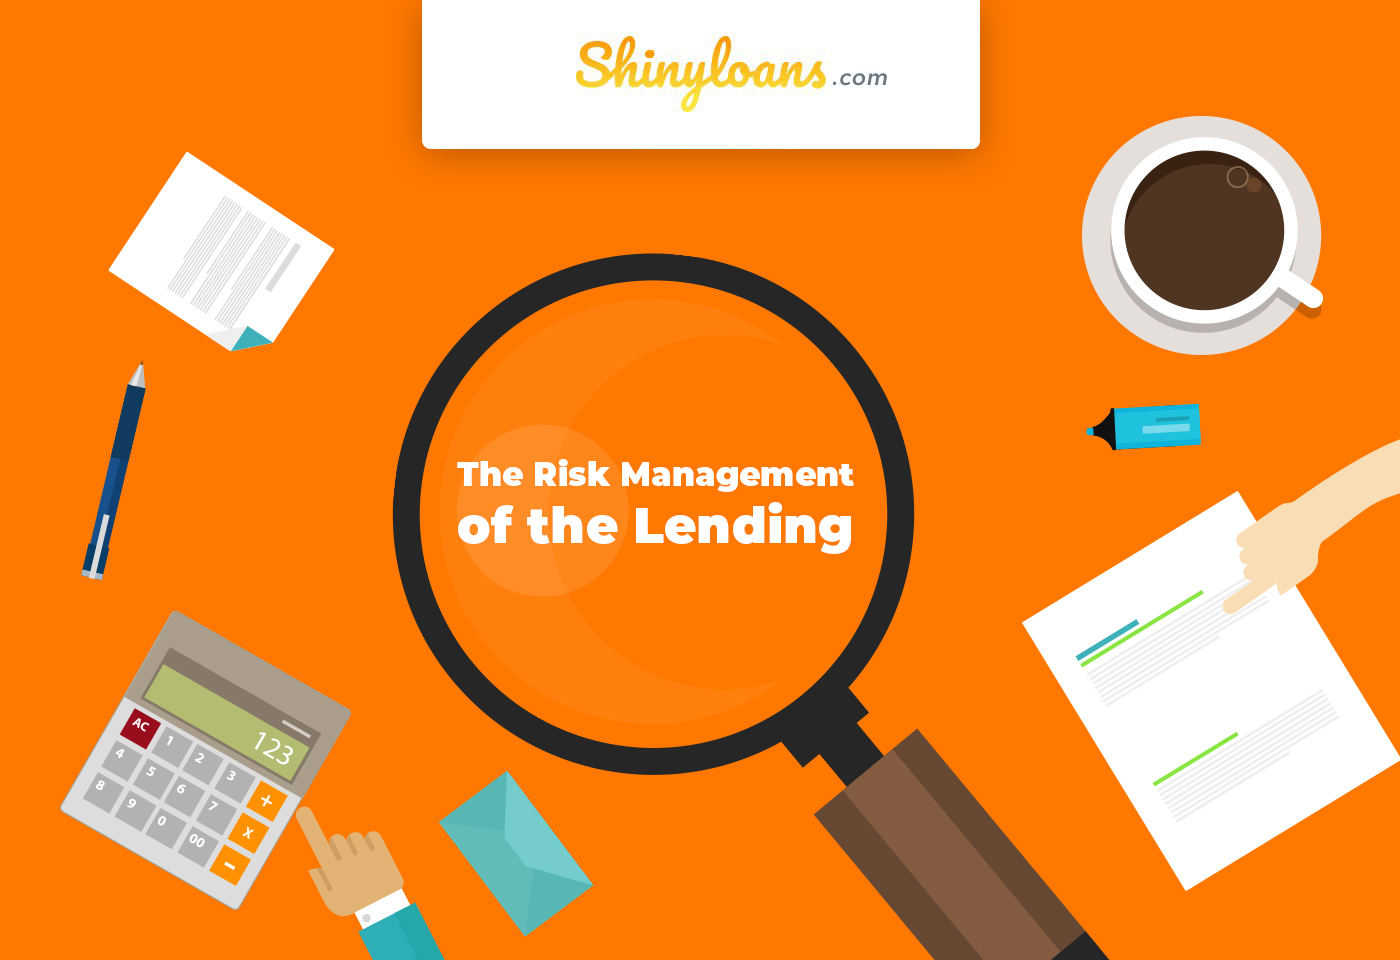 Credit Risk Management - What Is It? | ShinyLoans